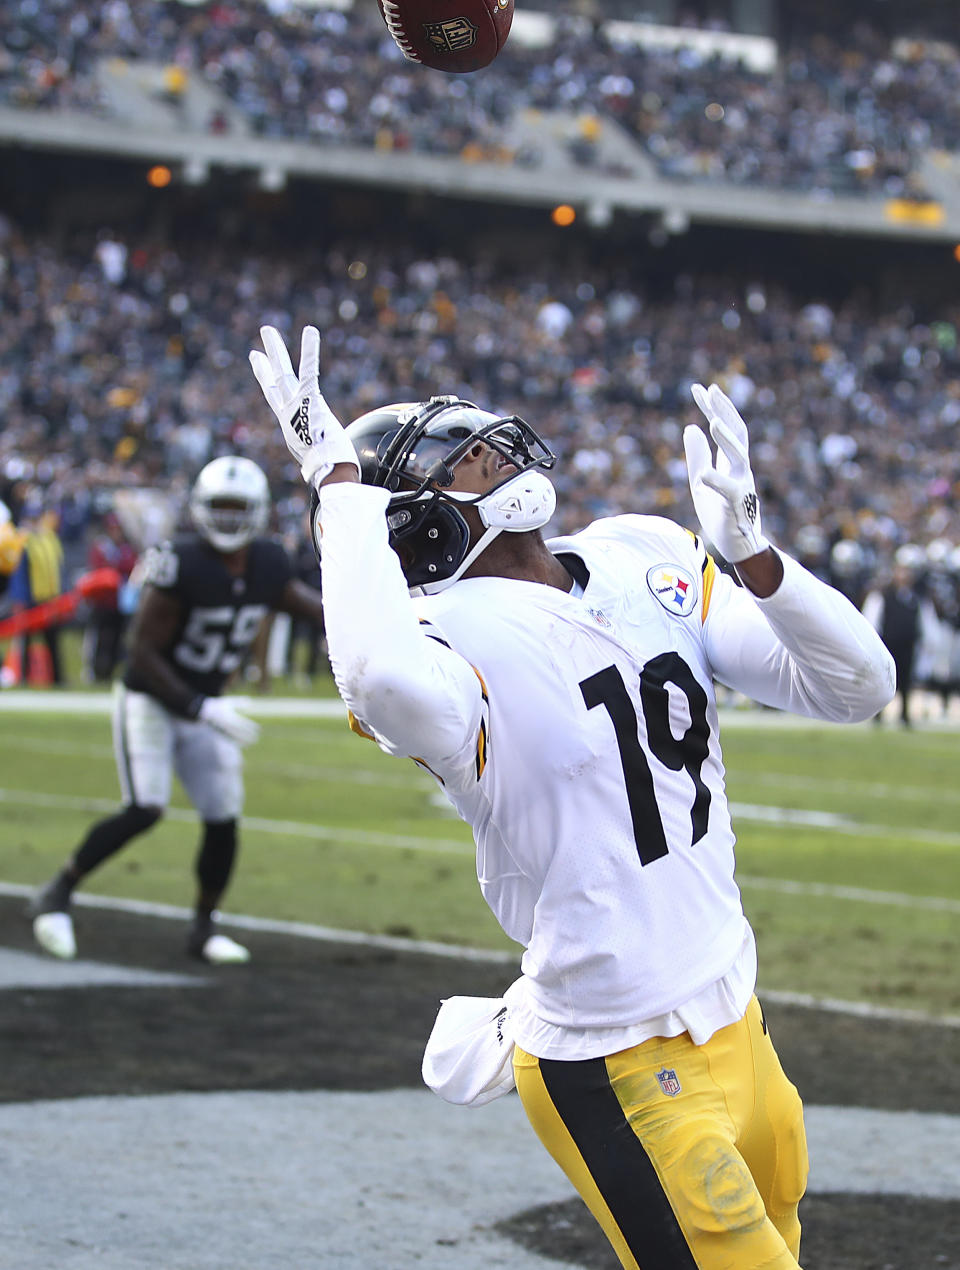 Pittsburgh Steelers wide receiver JuJu Smith-Schuster (19) waits to catch a touchdown pass against the Oakland Raiders during the first half of an NFL football game in Oakland, Calif., Sunday, Dec. 9, 2018. (AP Photo/Ben Margot)